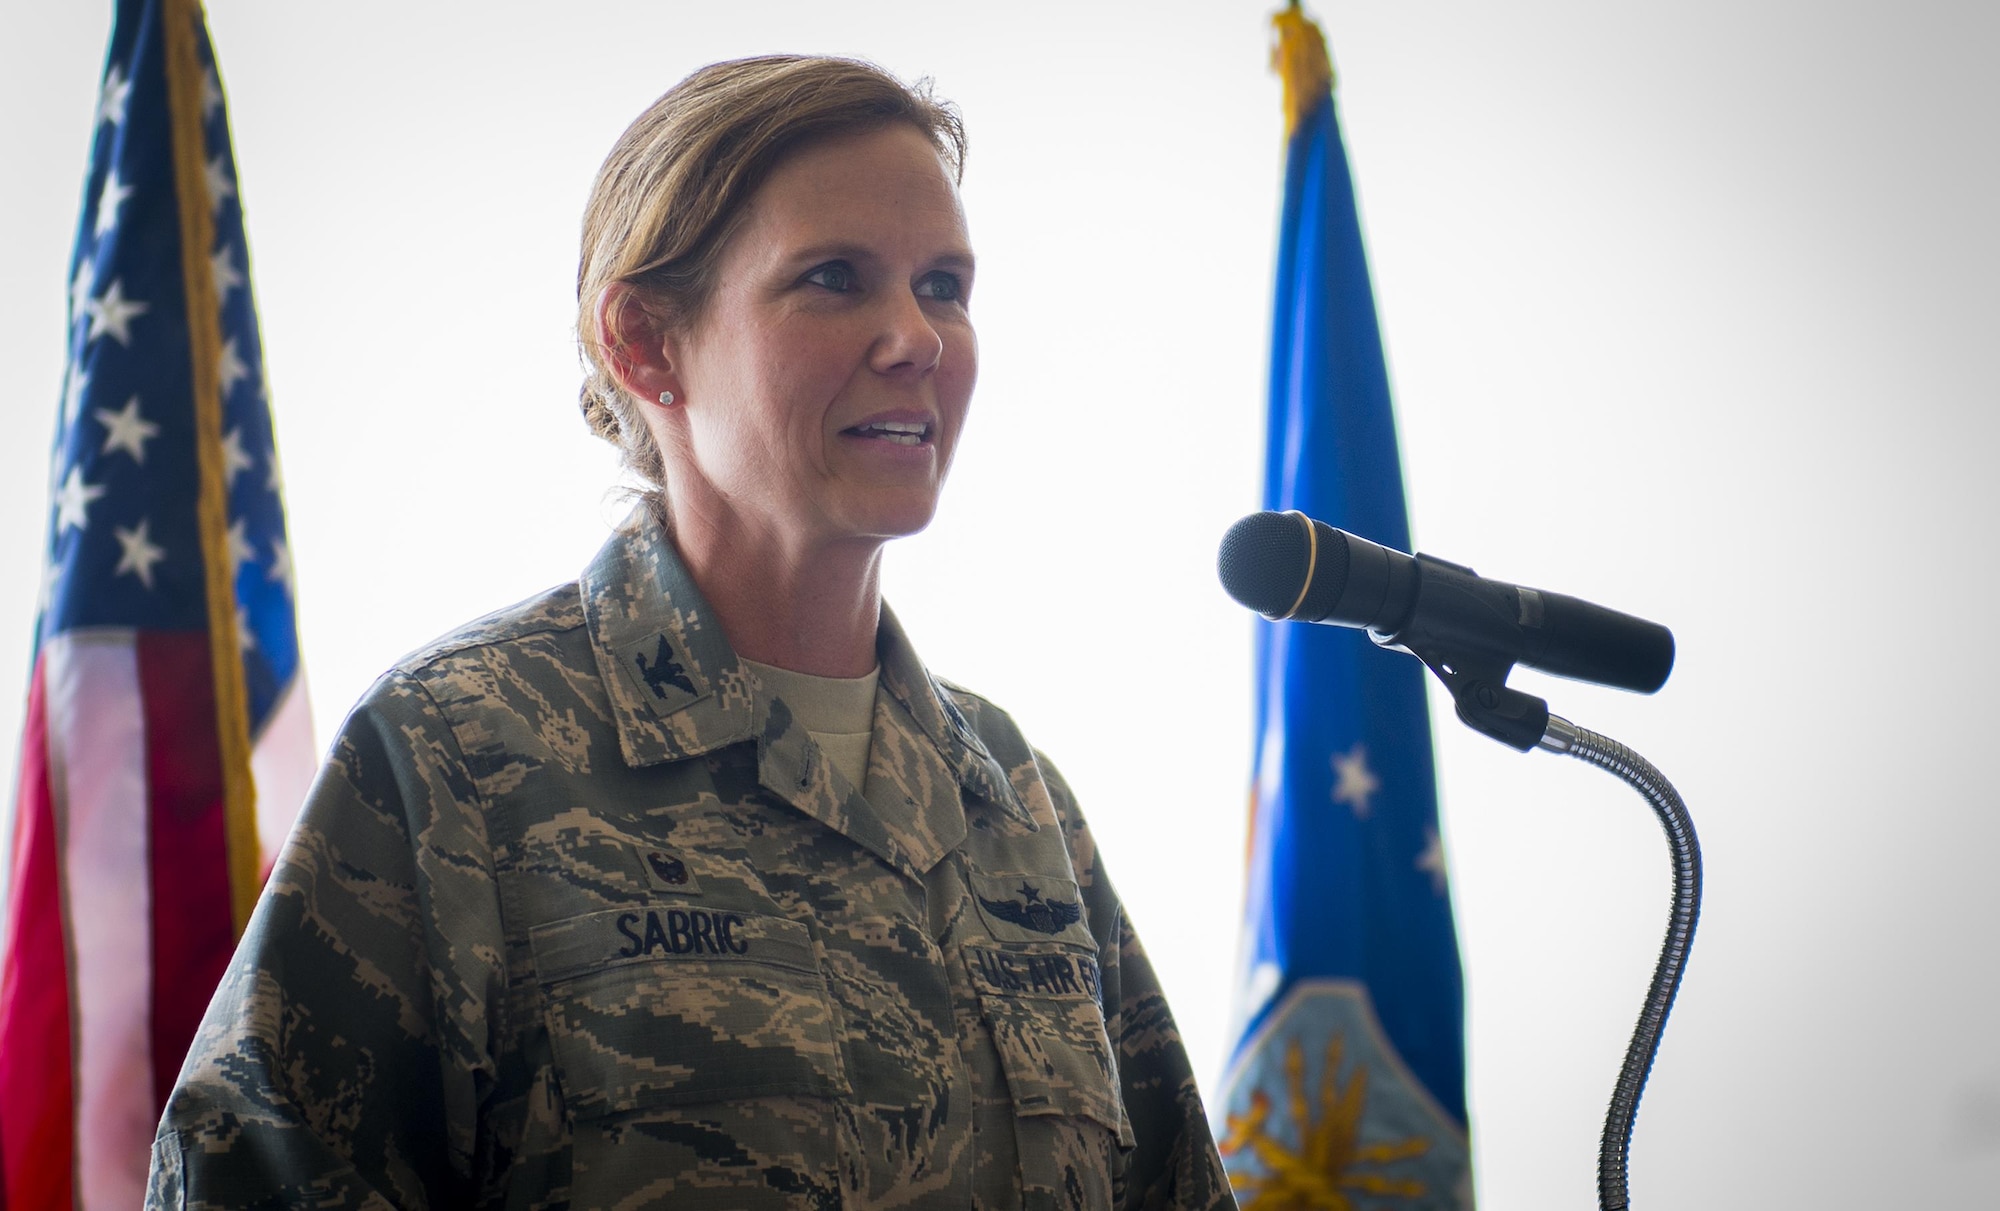 Col. Regina Sabric addresses her new group at the 919th Special Operations Group’s change of command ceremony June 12 at Duke Field, Fla.  Sabric was stationed at the Pentagon before becoming the first female commander of the group.  U.S. Air Force photo/Tech. Sgt. Sam King)